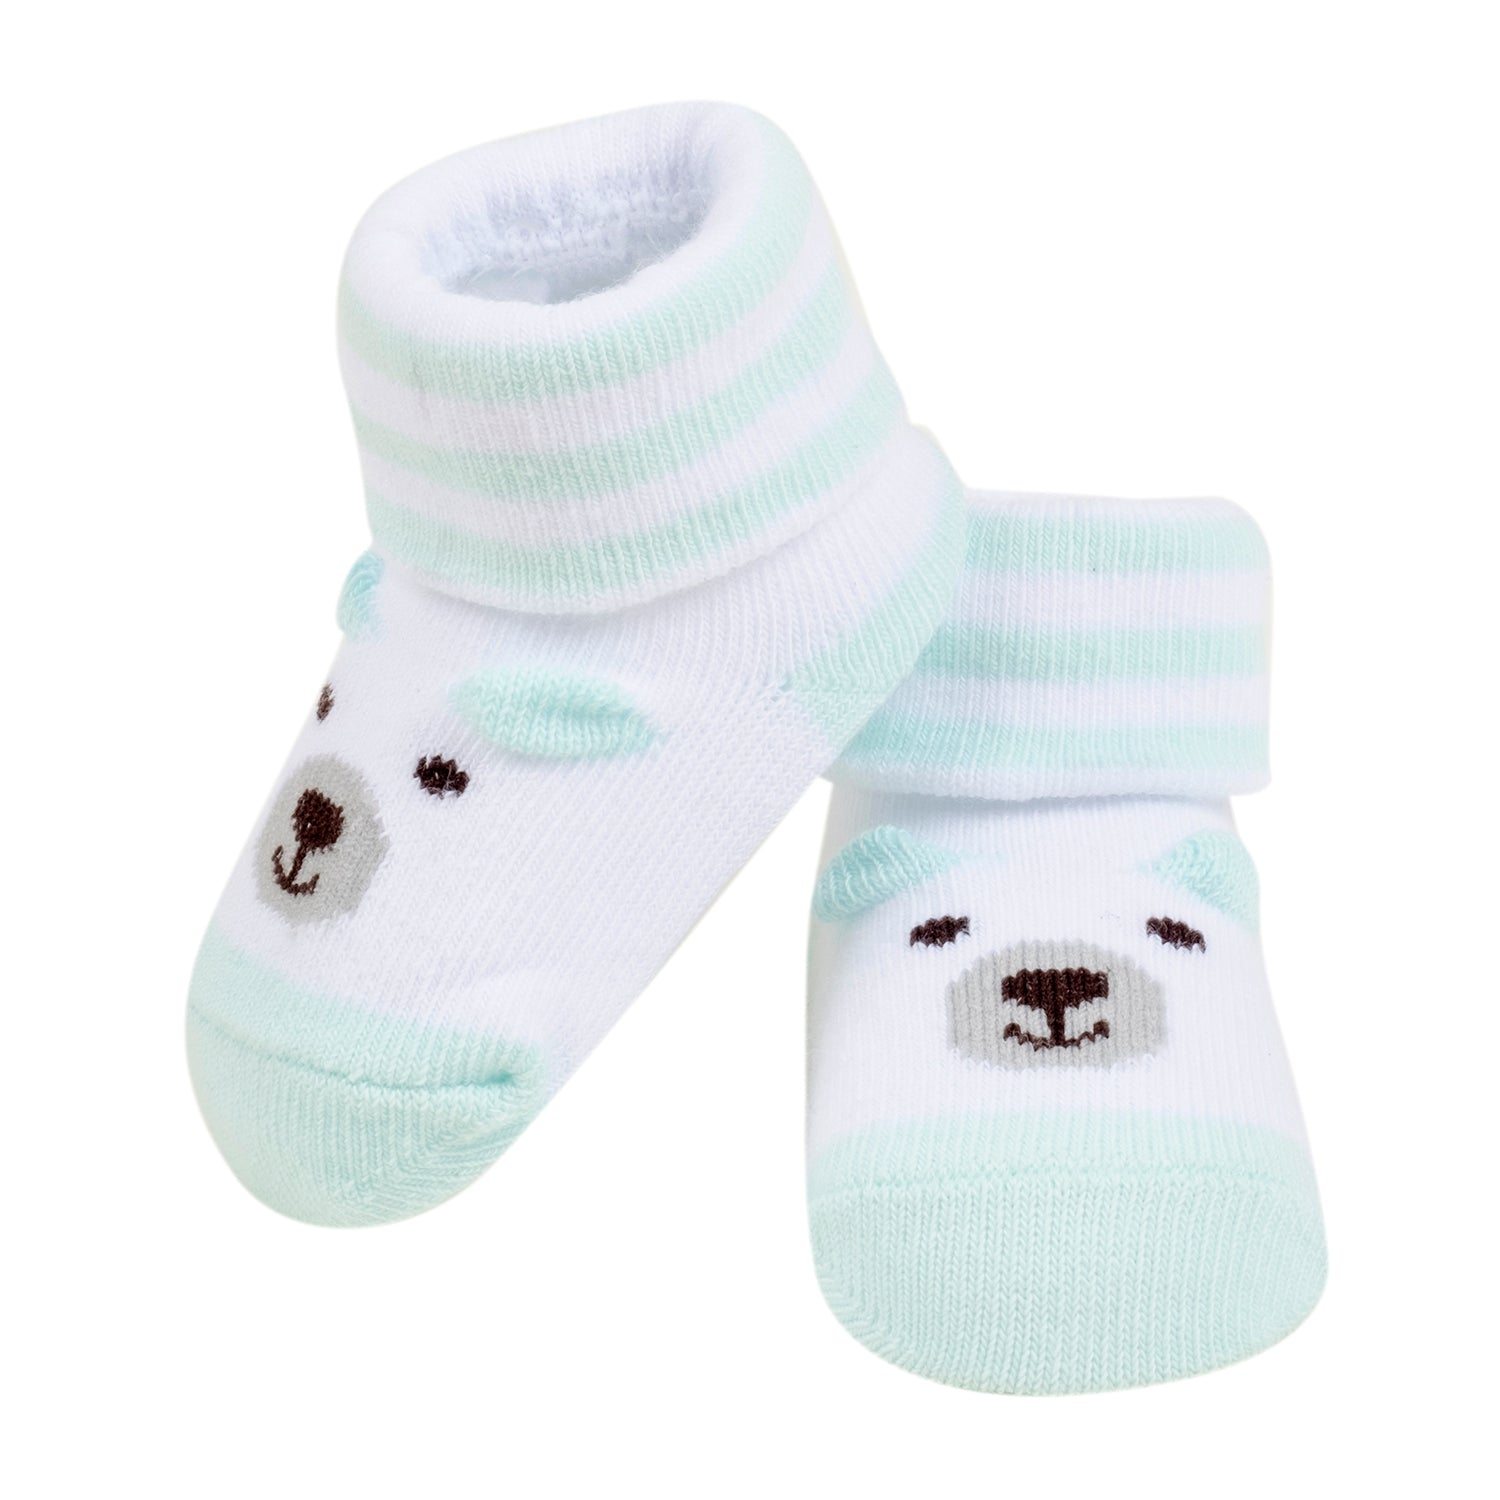 Baby Moo 3D Fox Bear Cotton Ankle Length Infant Dress Up Walking Set of 2 Socks Booties - Turquoise